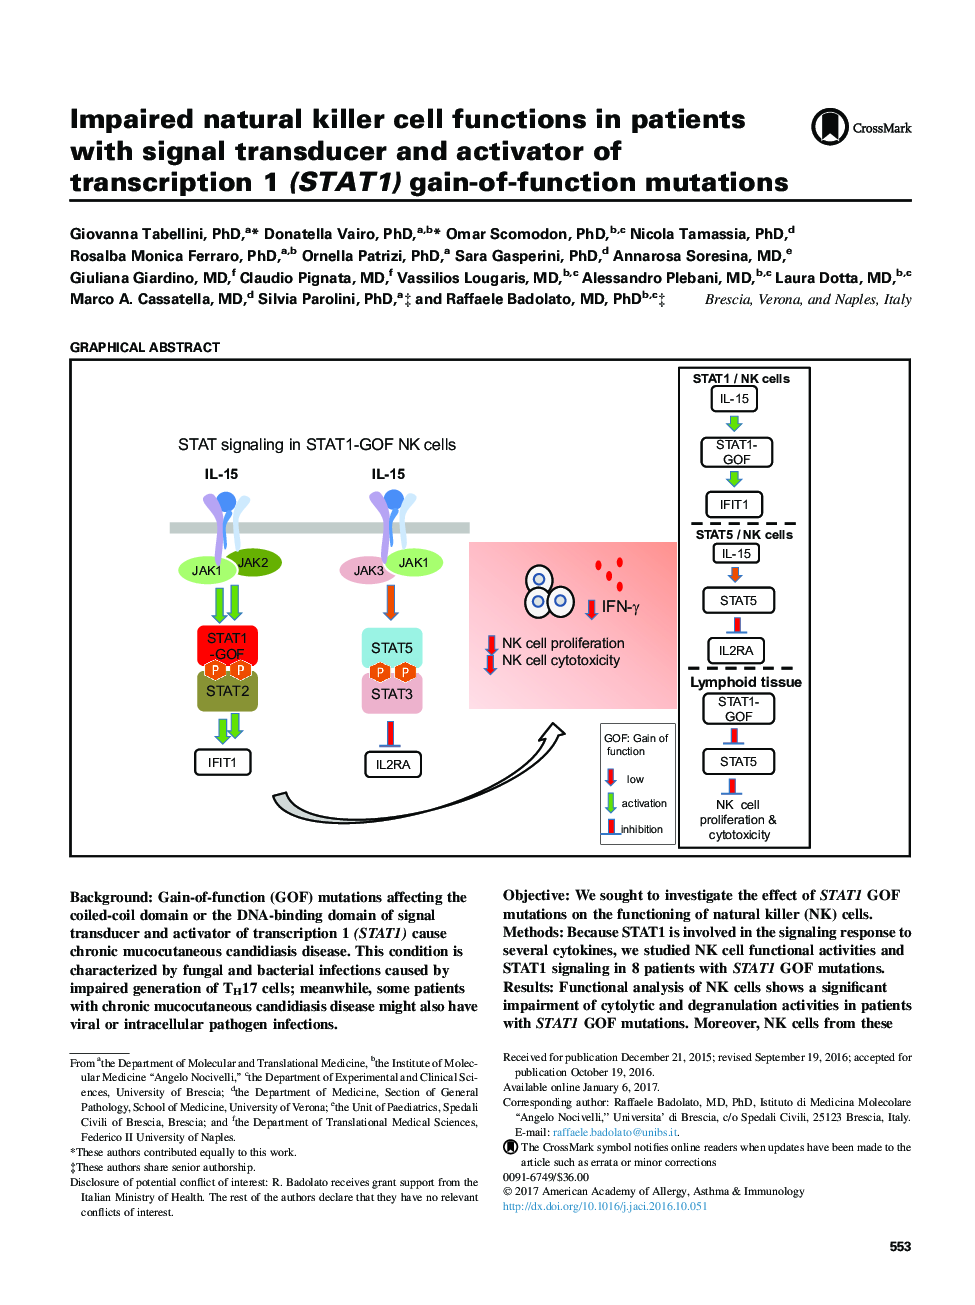 Impaired natural killer cell functions in patients with signal transducer and activator of transcription 1 (STAT1) gain-of-function mutations